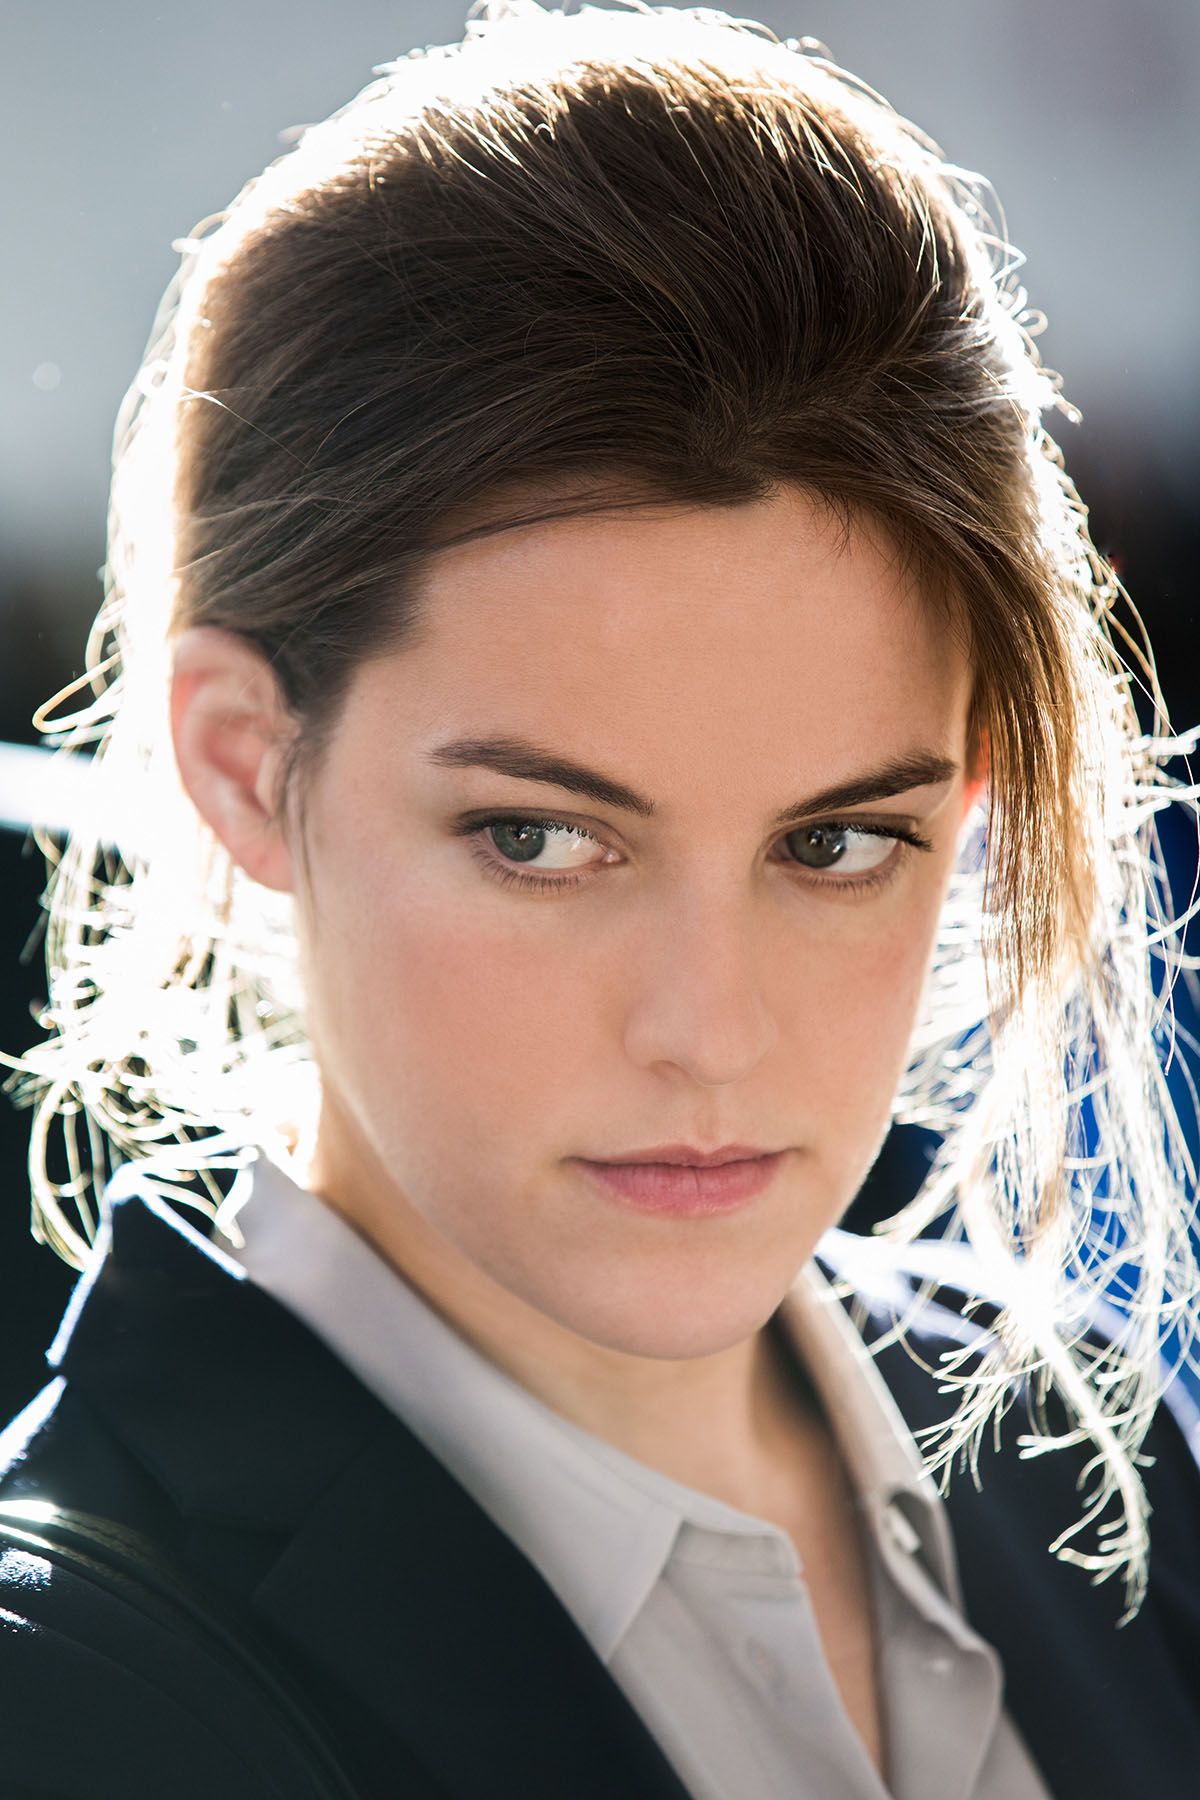 The Girlfriend Experience Riley Keough Interview Collider